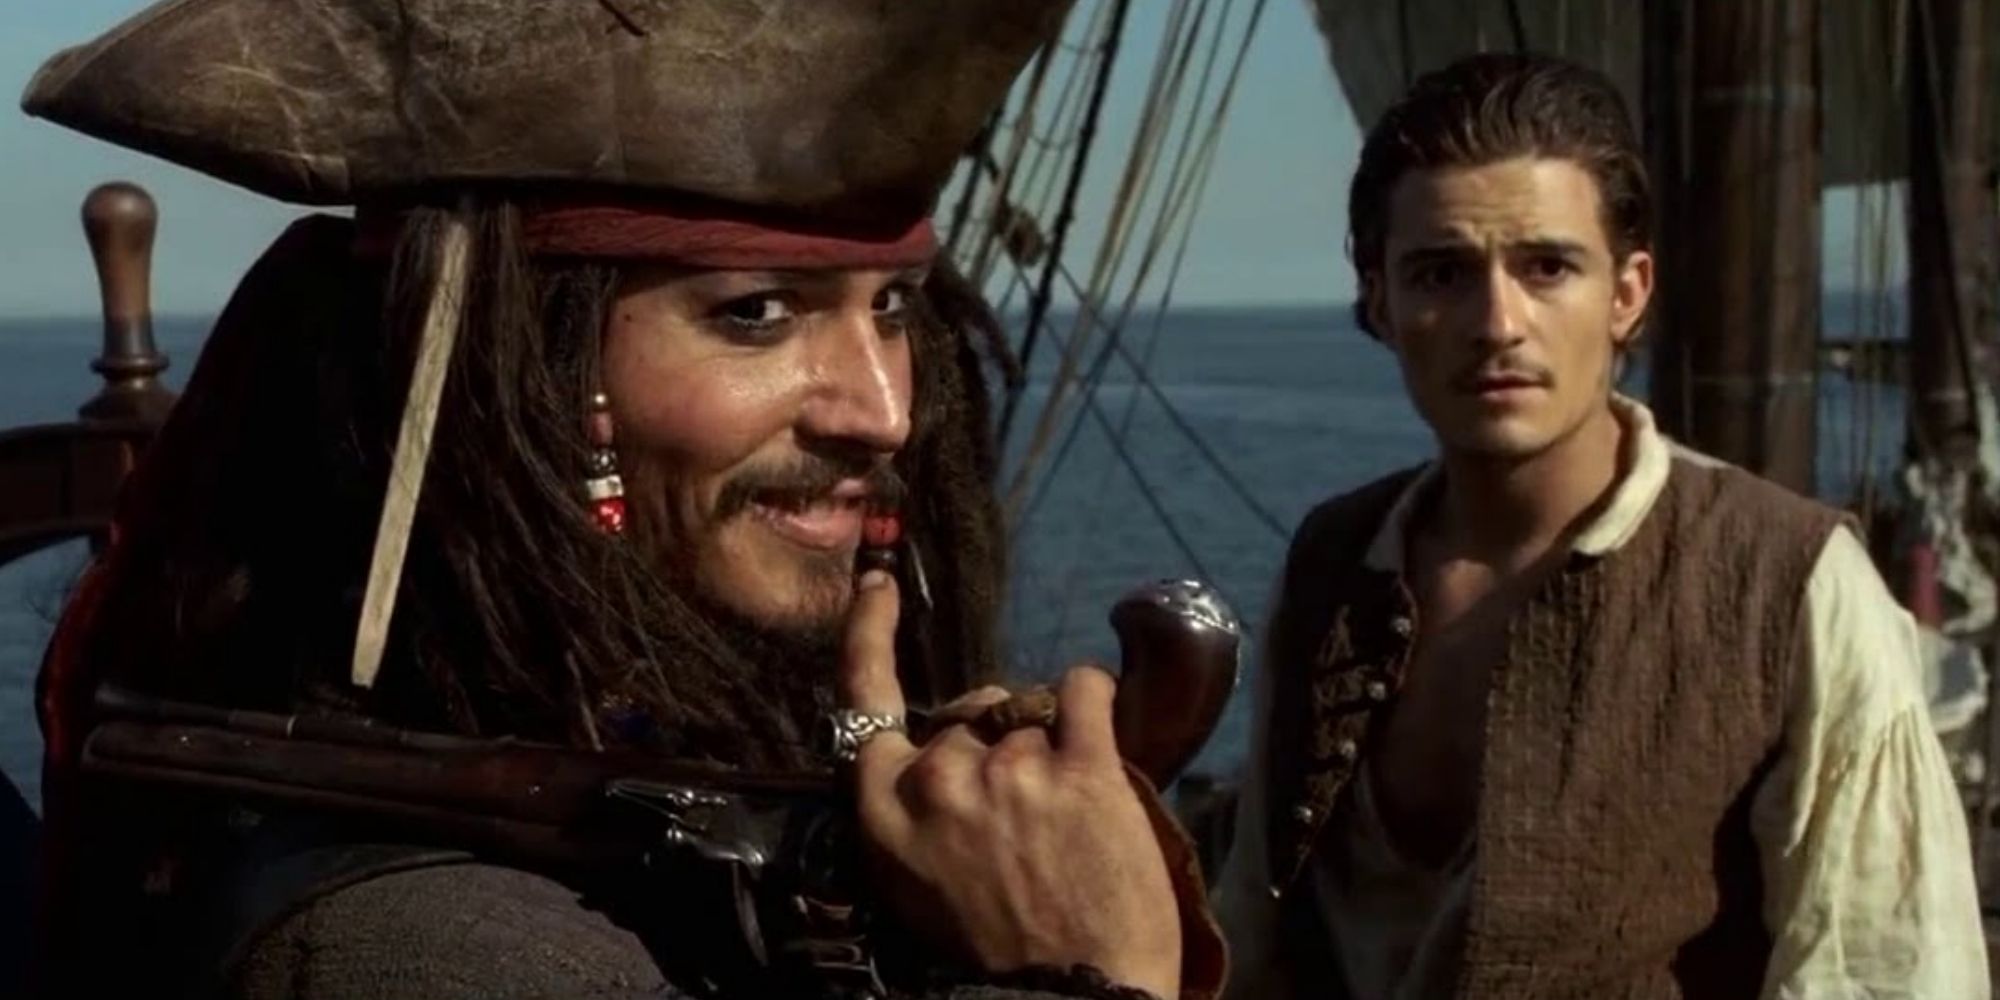 Jack Sparrow hält eine Waffe neben Will Turner aus „Pirates of the Caribbean: The Curse of the Black Pearl“